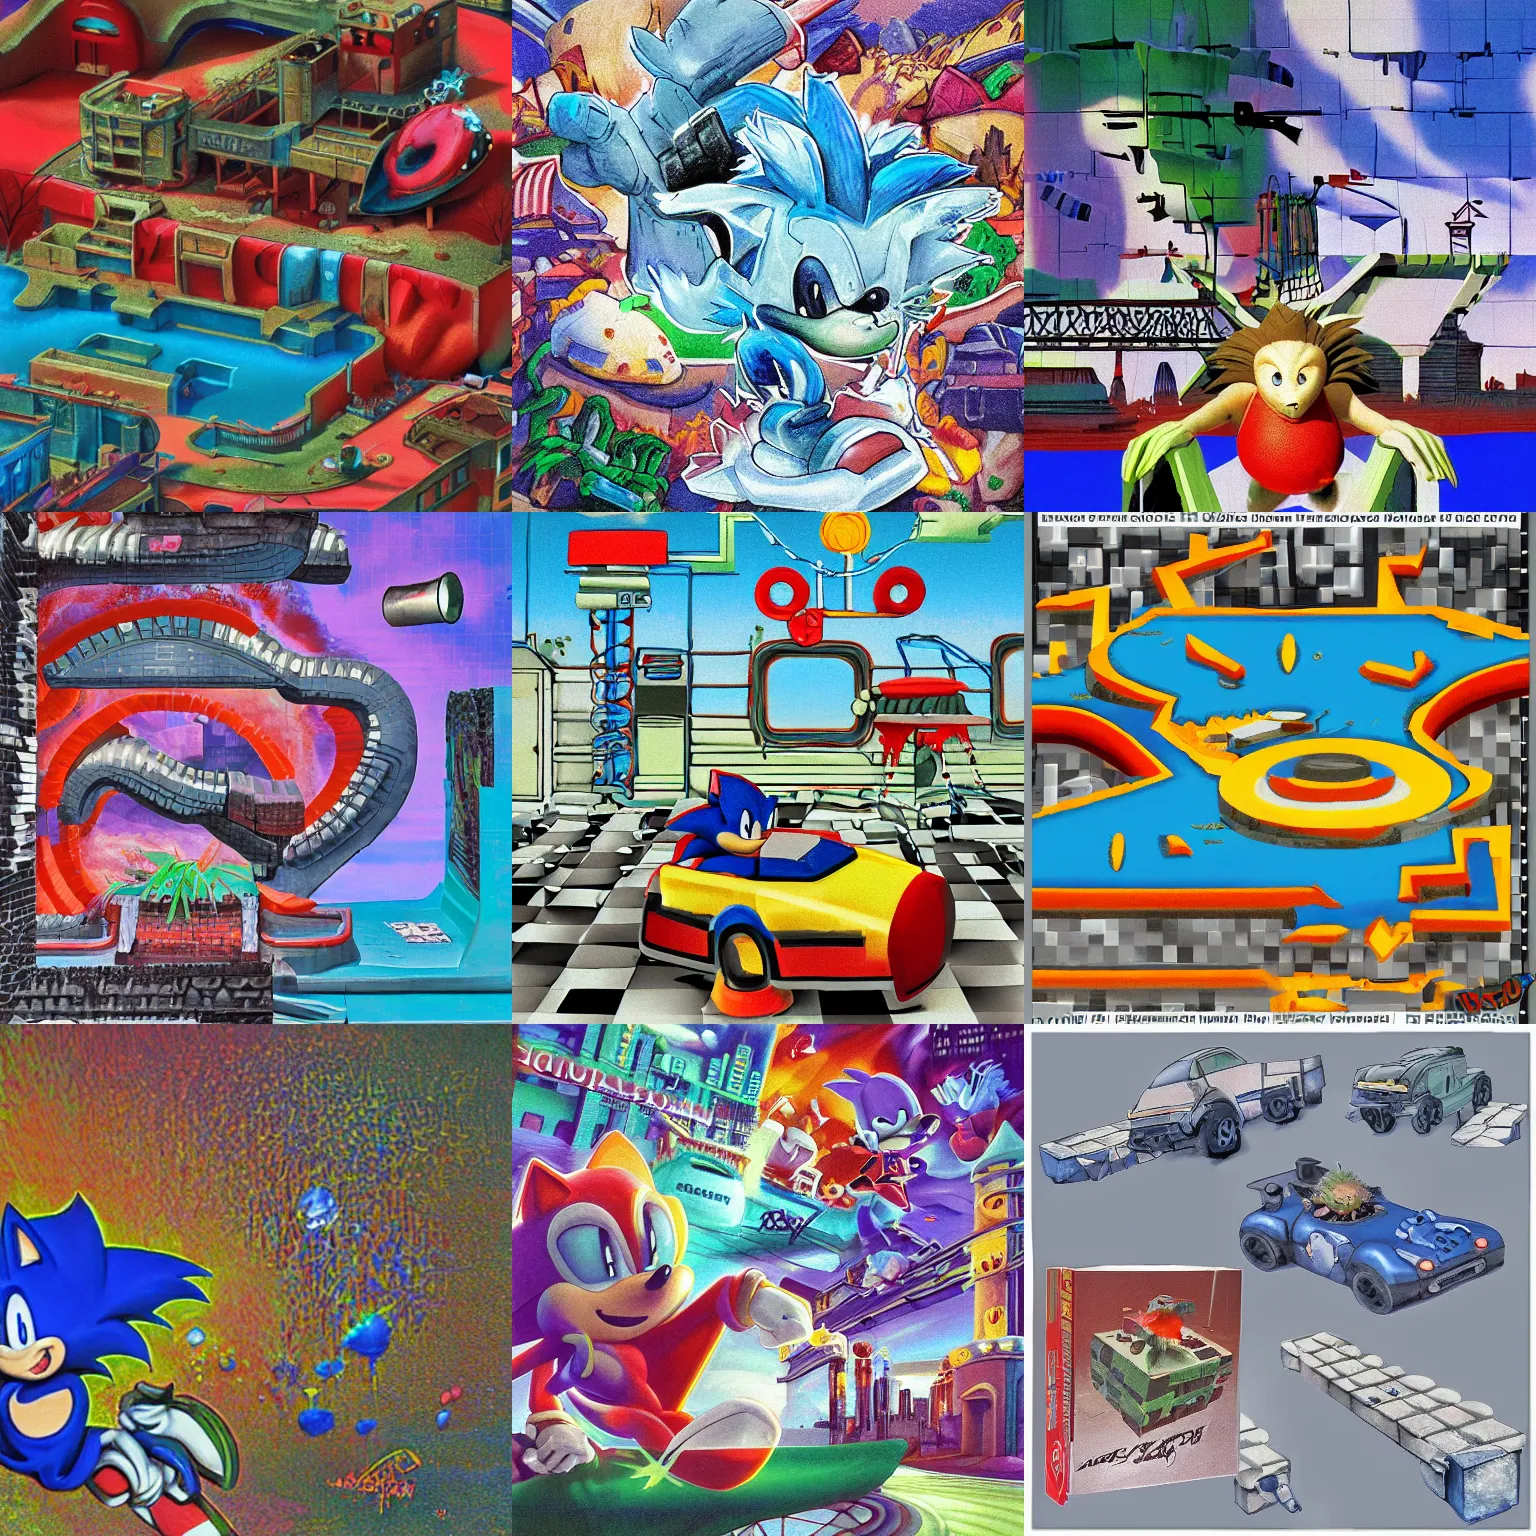 Prompt: dreaming of deconstructivist claymation portrait of sonic hedgehog and a matte painting landscape of a surreal sharp, foggy detailed professional soft pastels high quality airbrush art album cover of a liquid dissolving airbrush art lsd sonic the hedgehog swimming through cyberspace holographic checkerboard background 1 9 9 0 s 1 9 9 2 sega genesis rareware video game album cover